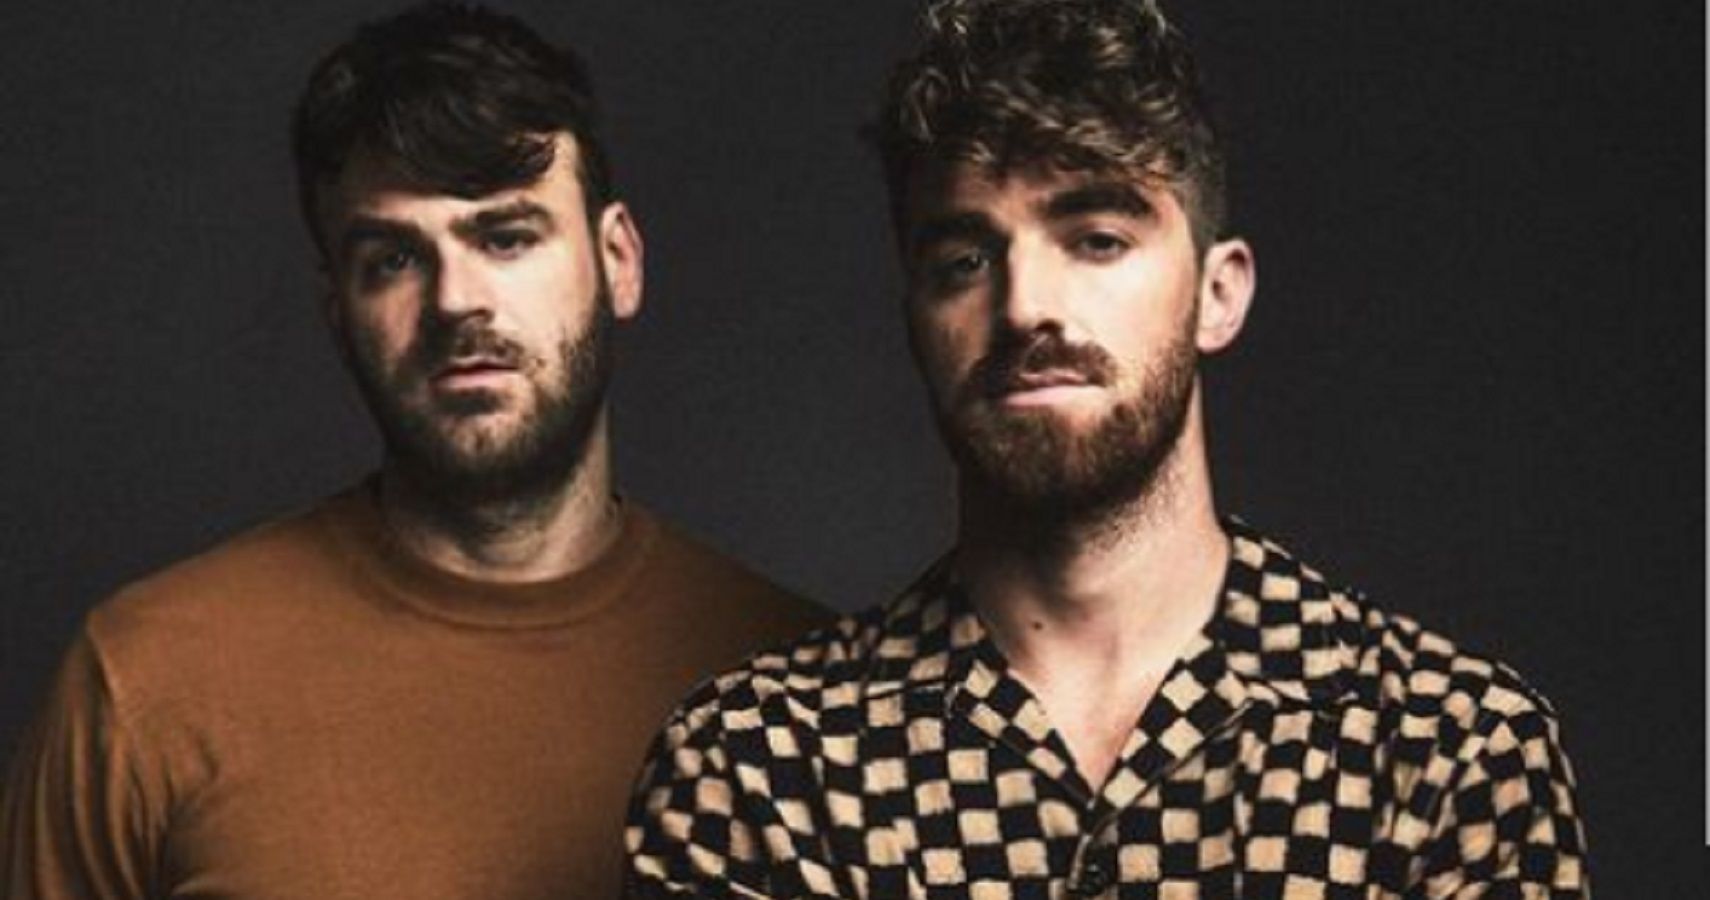 Here's How The Chainsmokers Built Their Empire